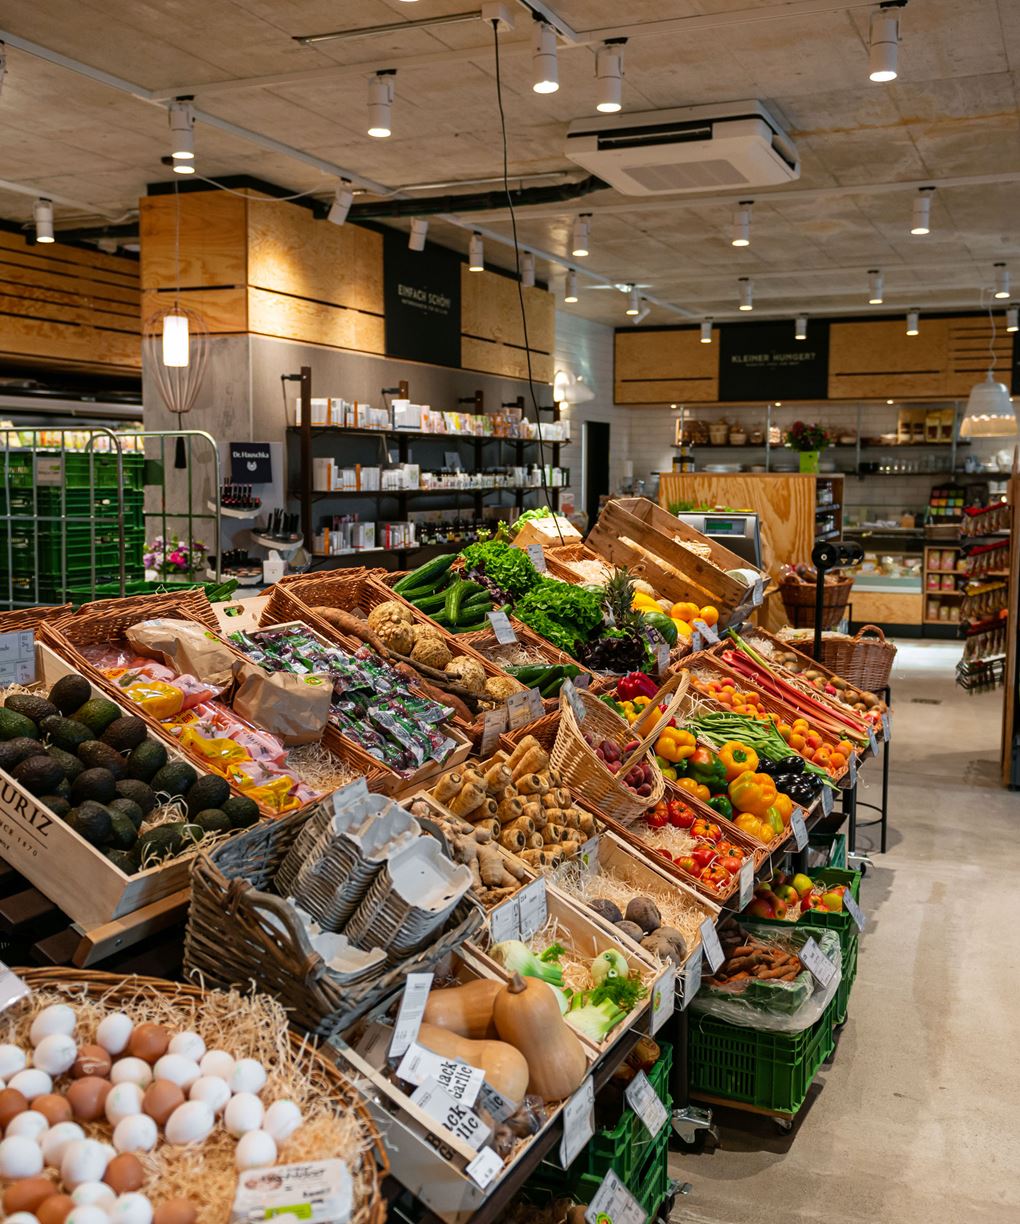 Organic products wholesaler doubles output with AutoStore installed by Swisslog